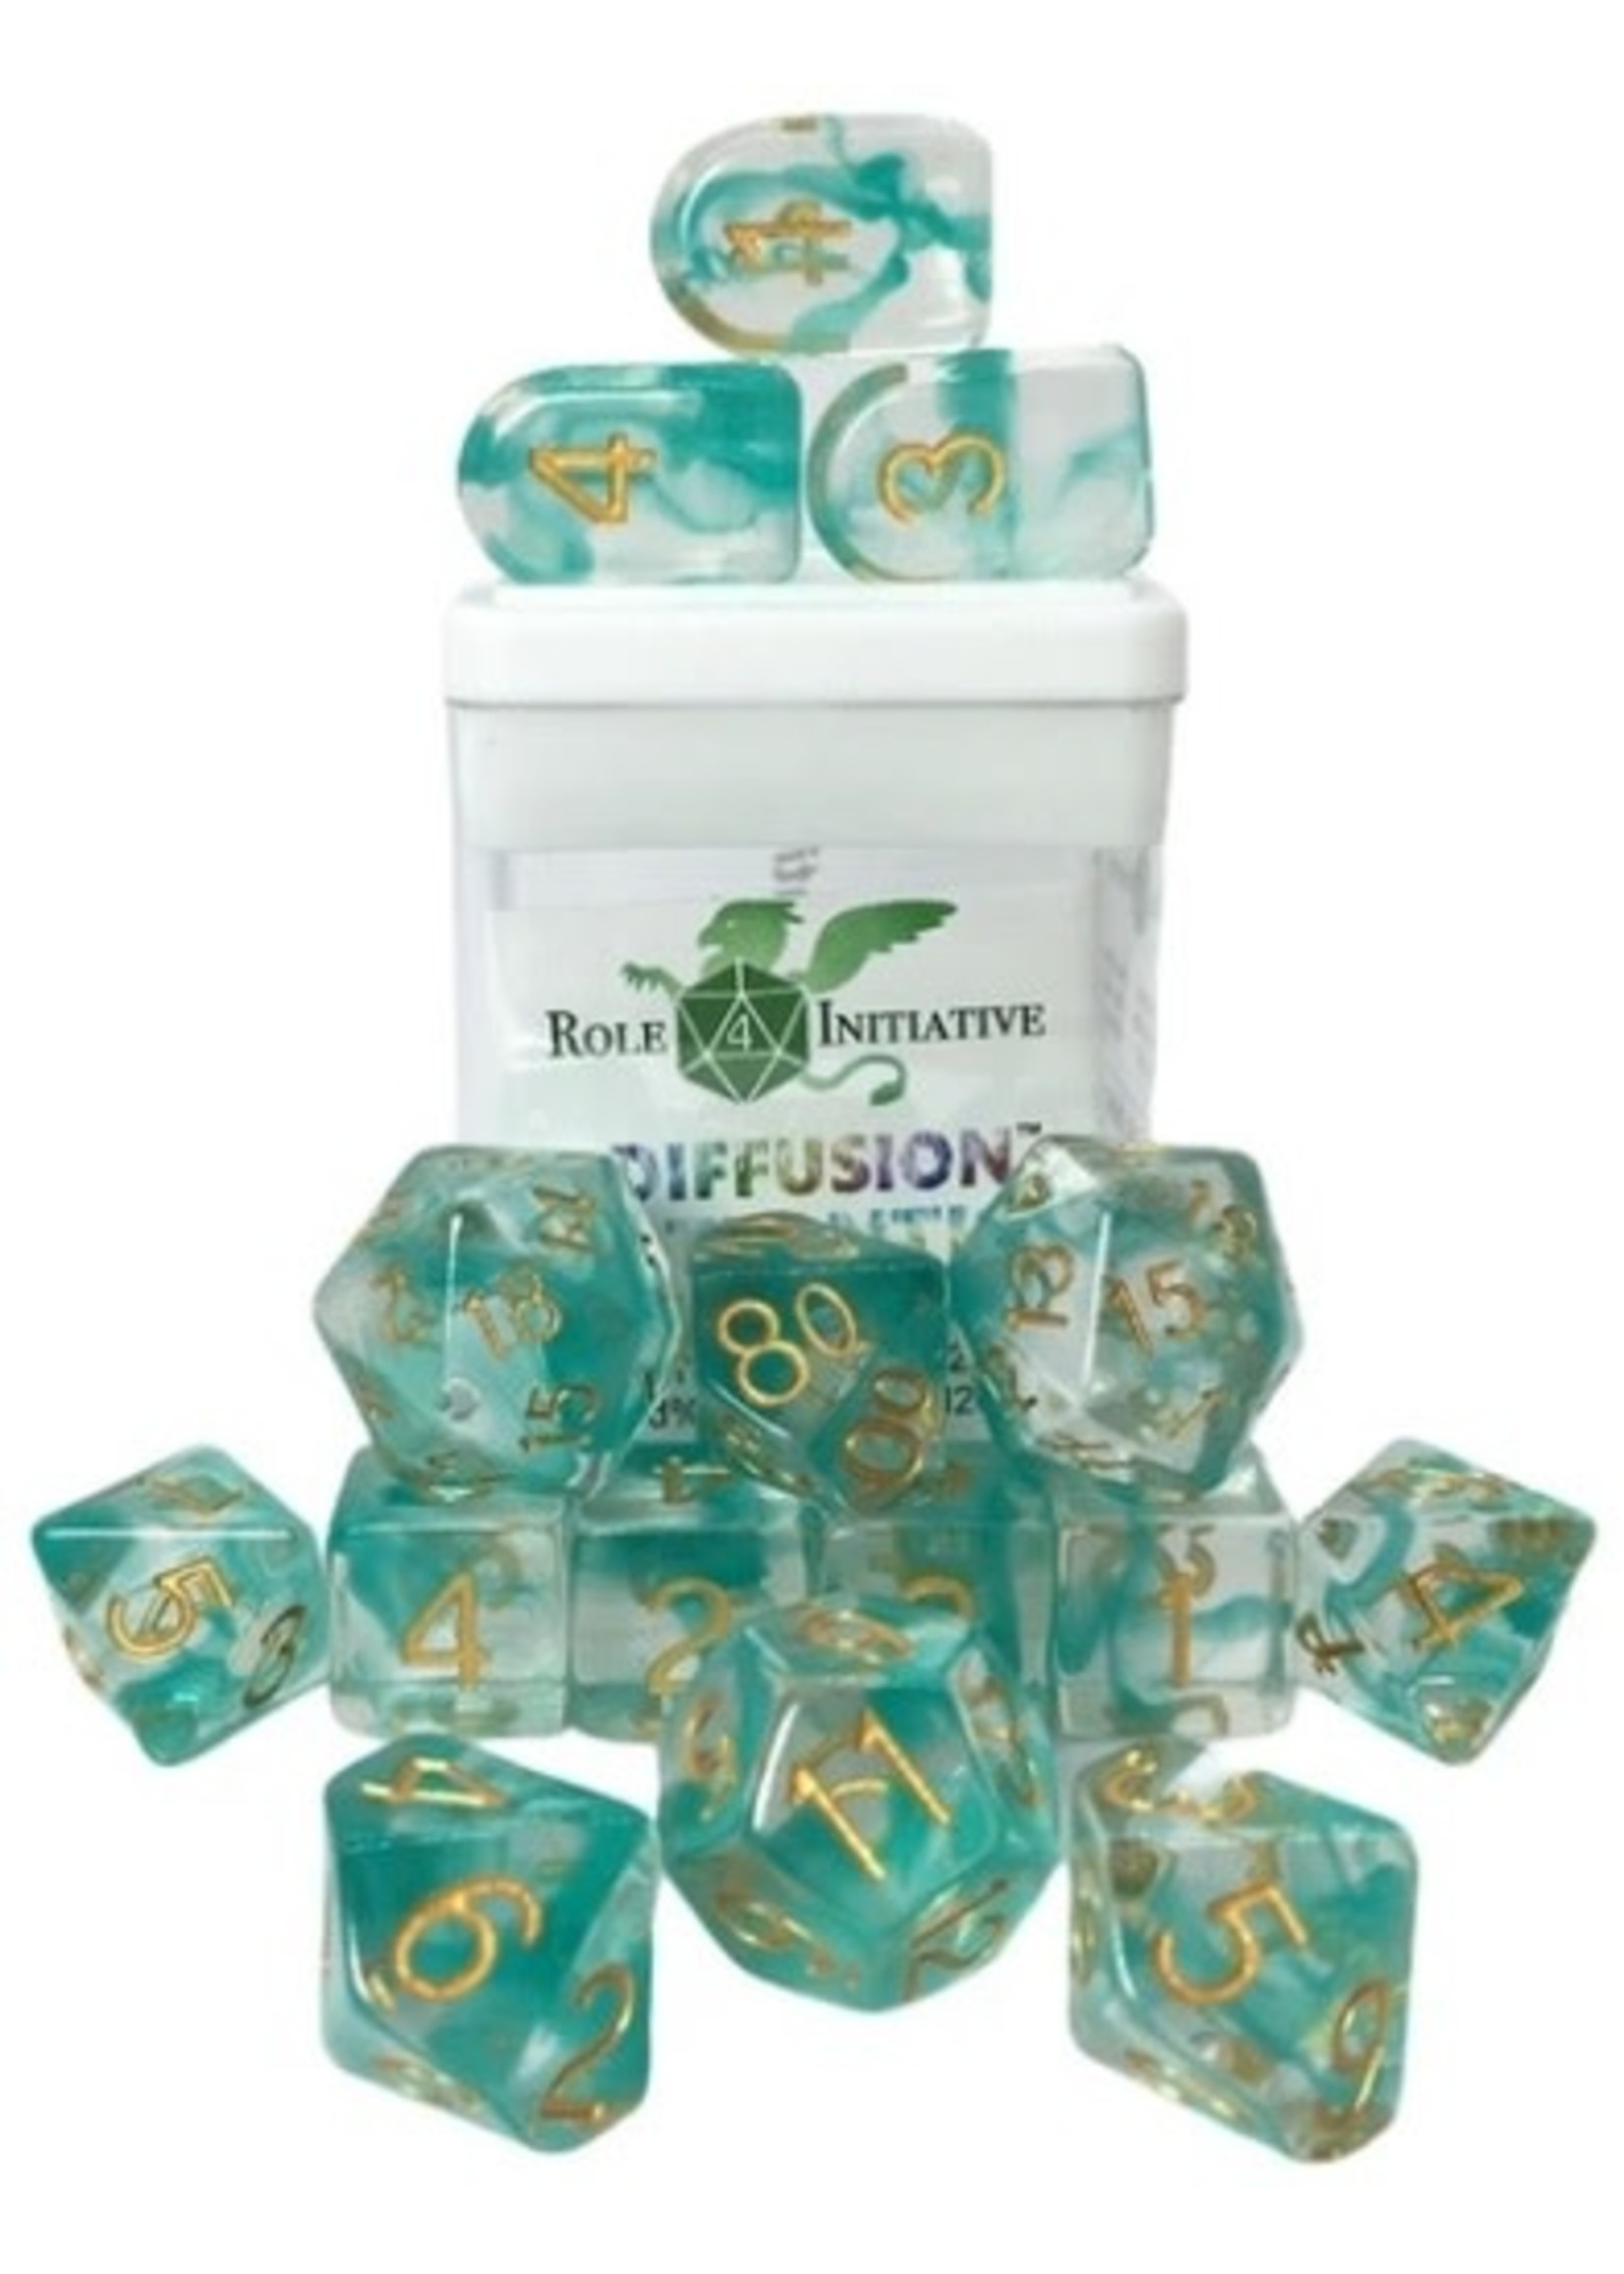 Role 4 Initiative Atlantis - Set of 15 Polyhedral Dice - Diffusion Dice